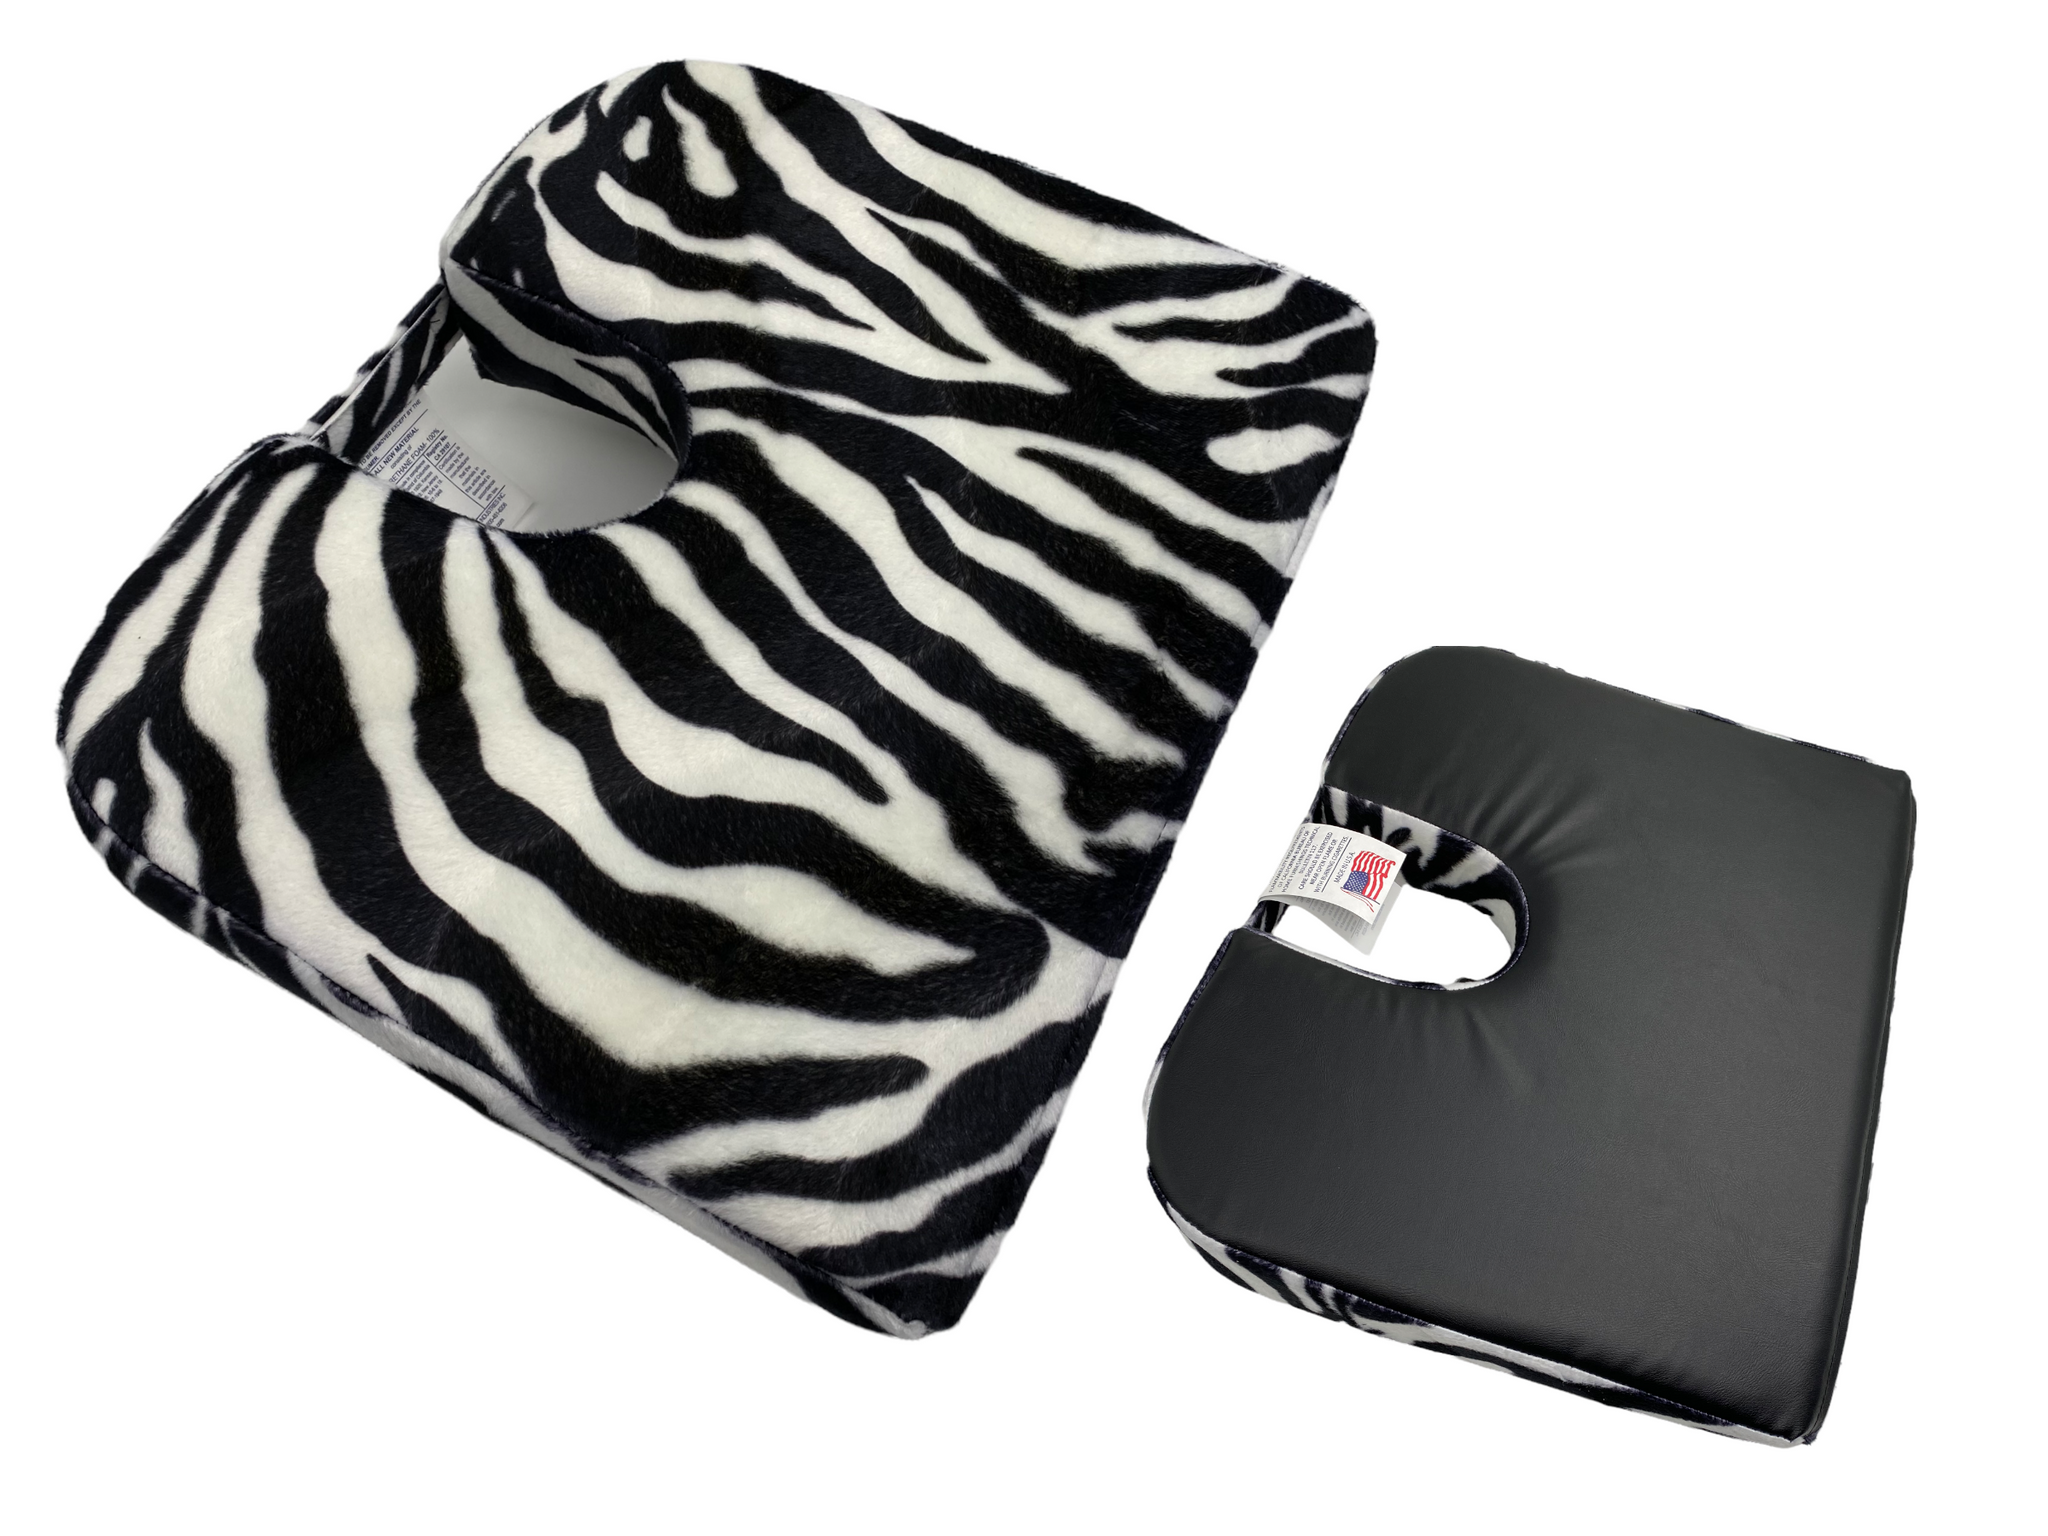 Car-Cush® 13 x 16 Seat Cushion Relieves Pain, Pressure From Sitting